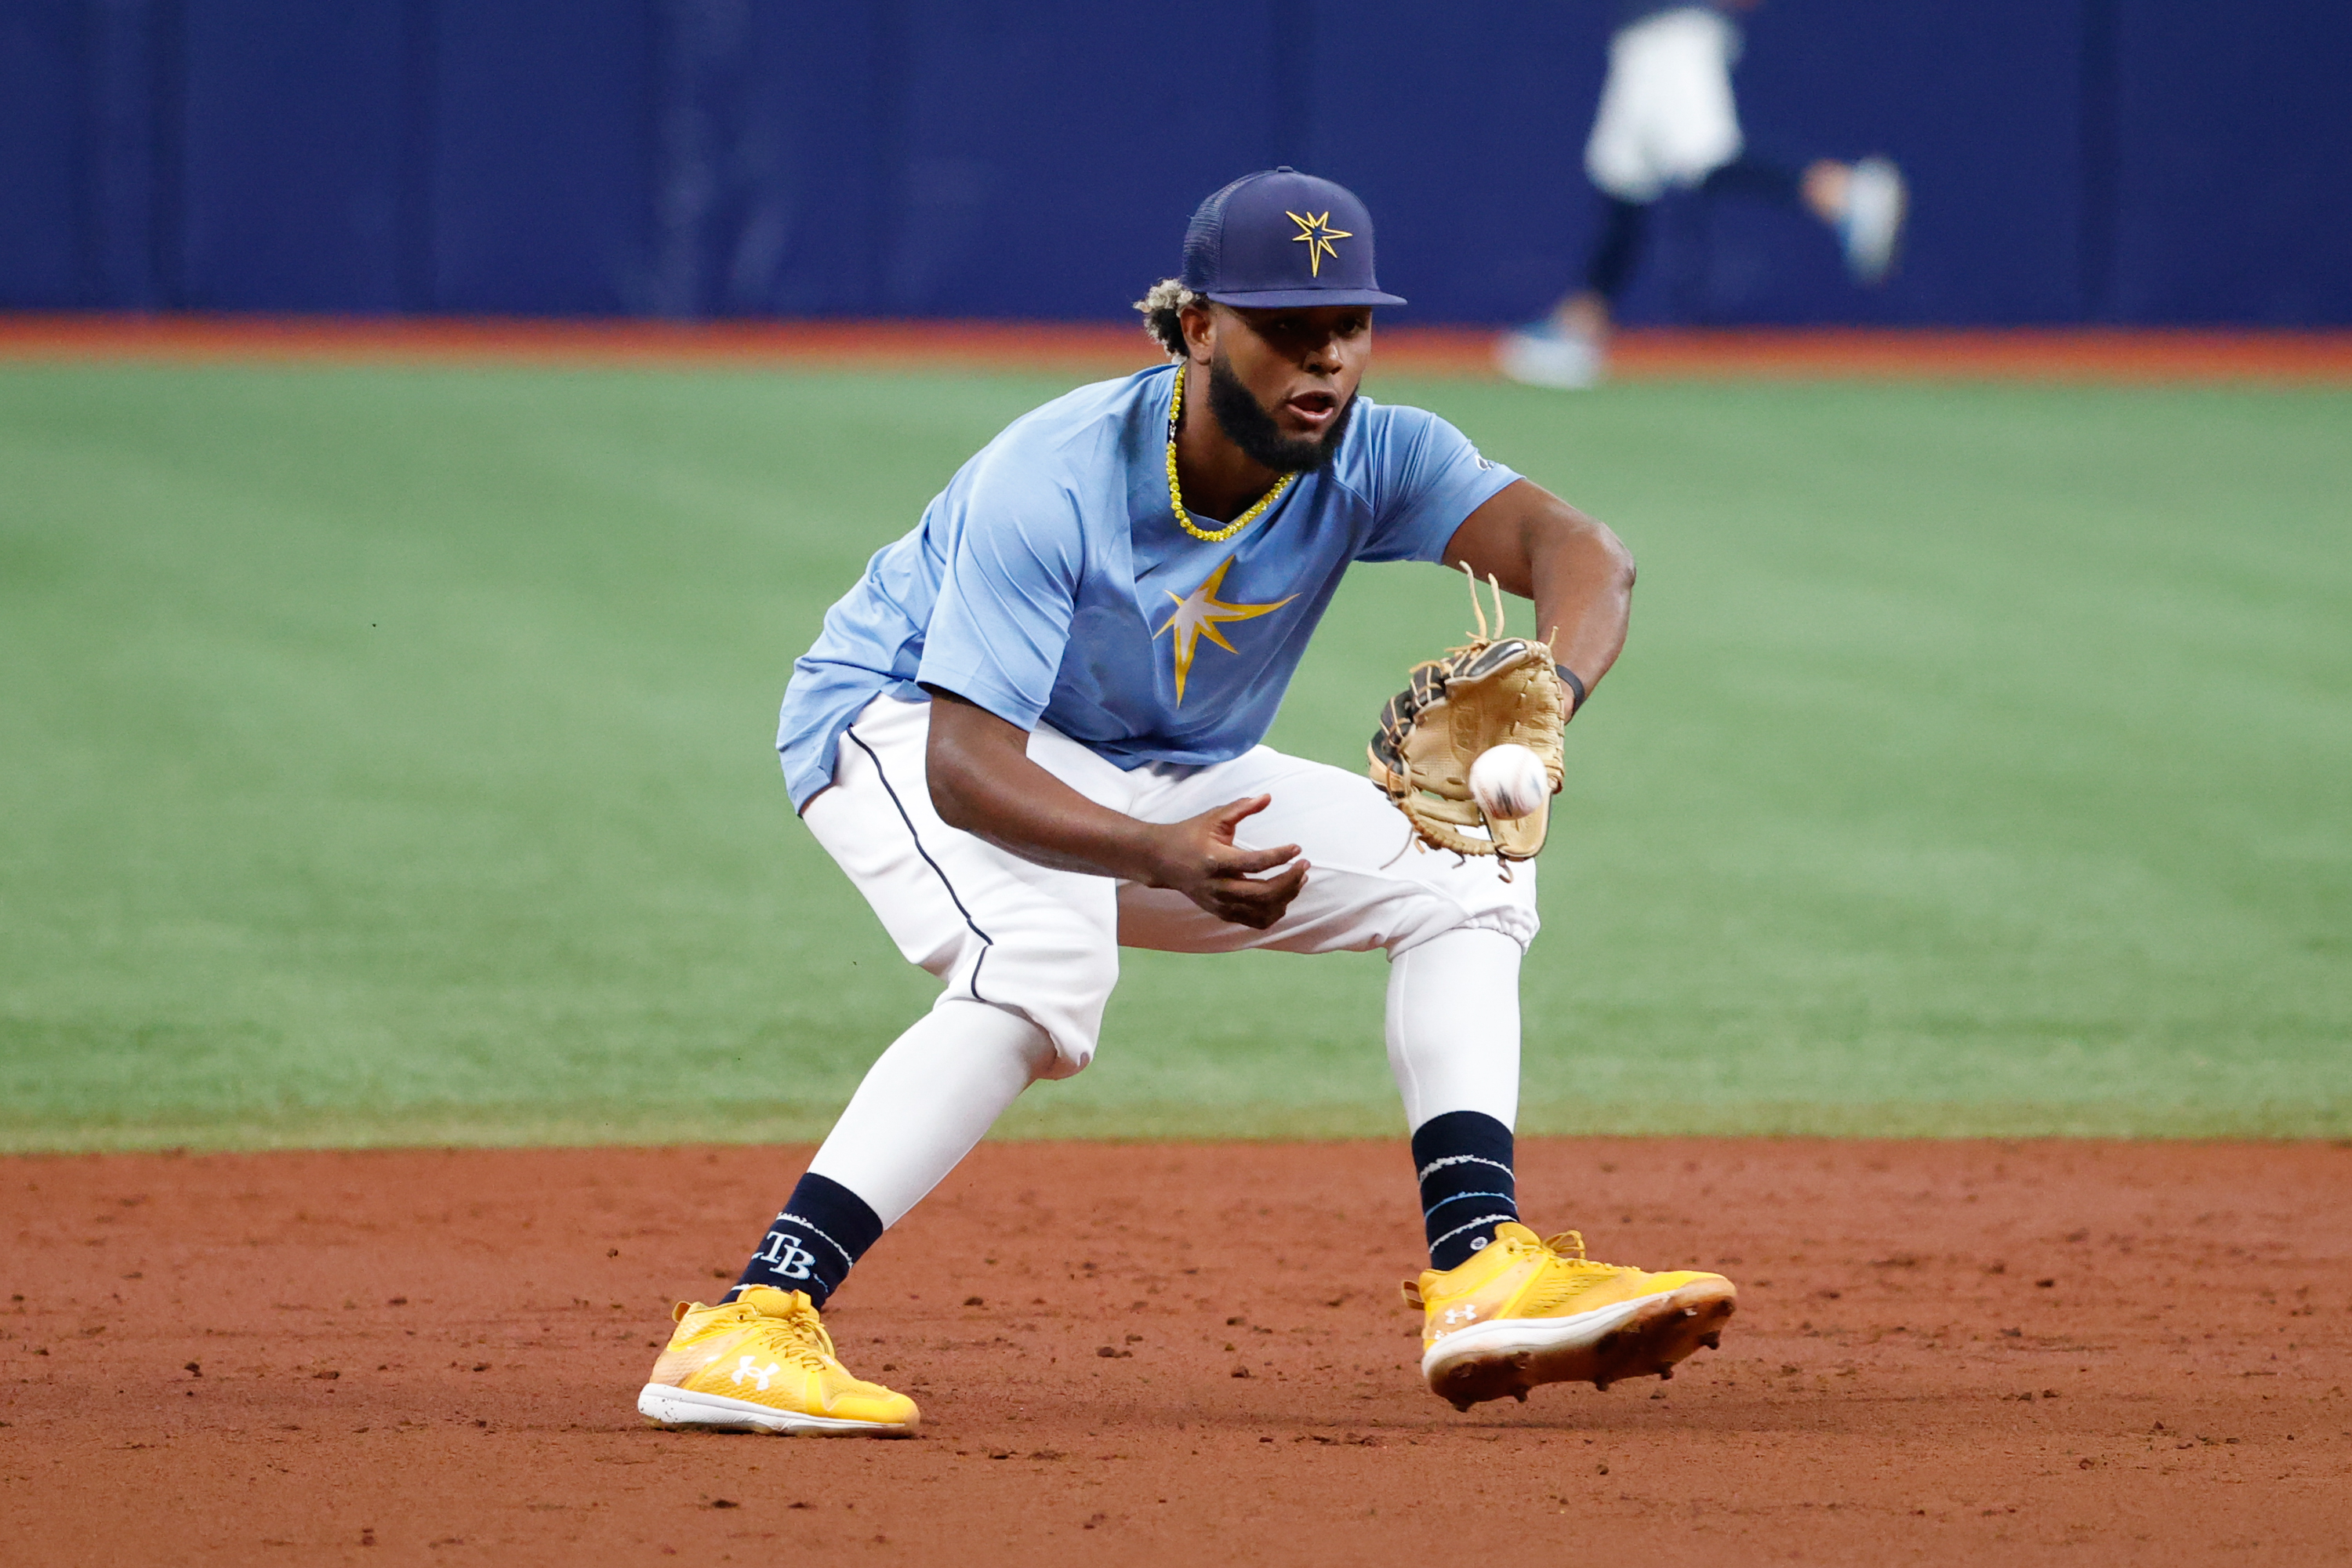 Rays prospects Carson Williams, Junior Caminero get a taste of the majors